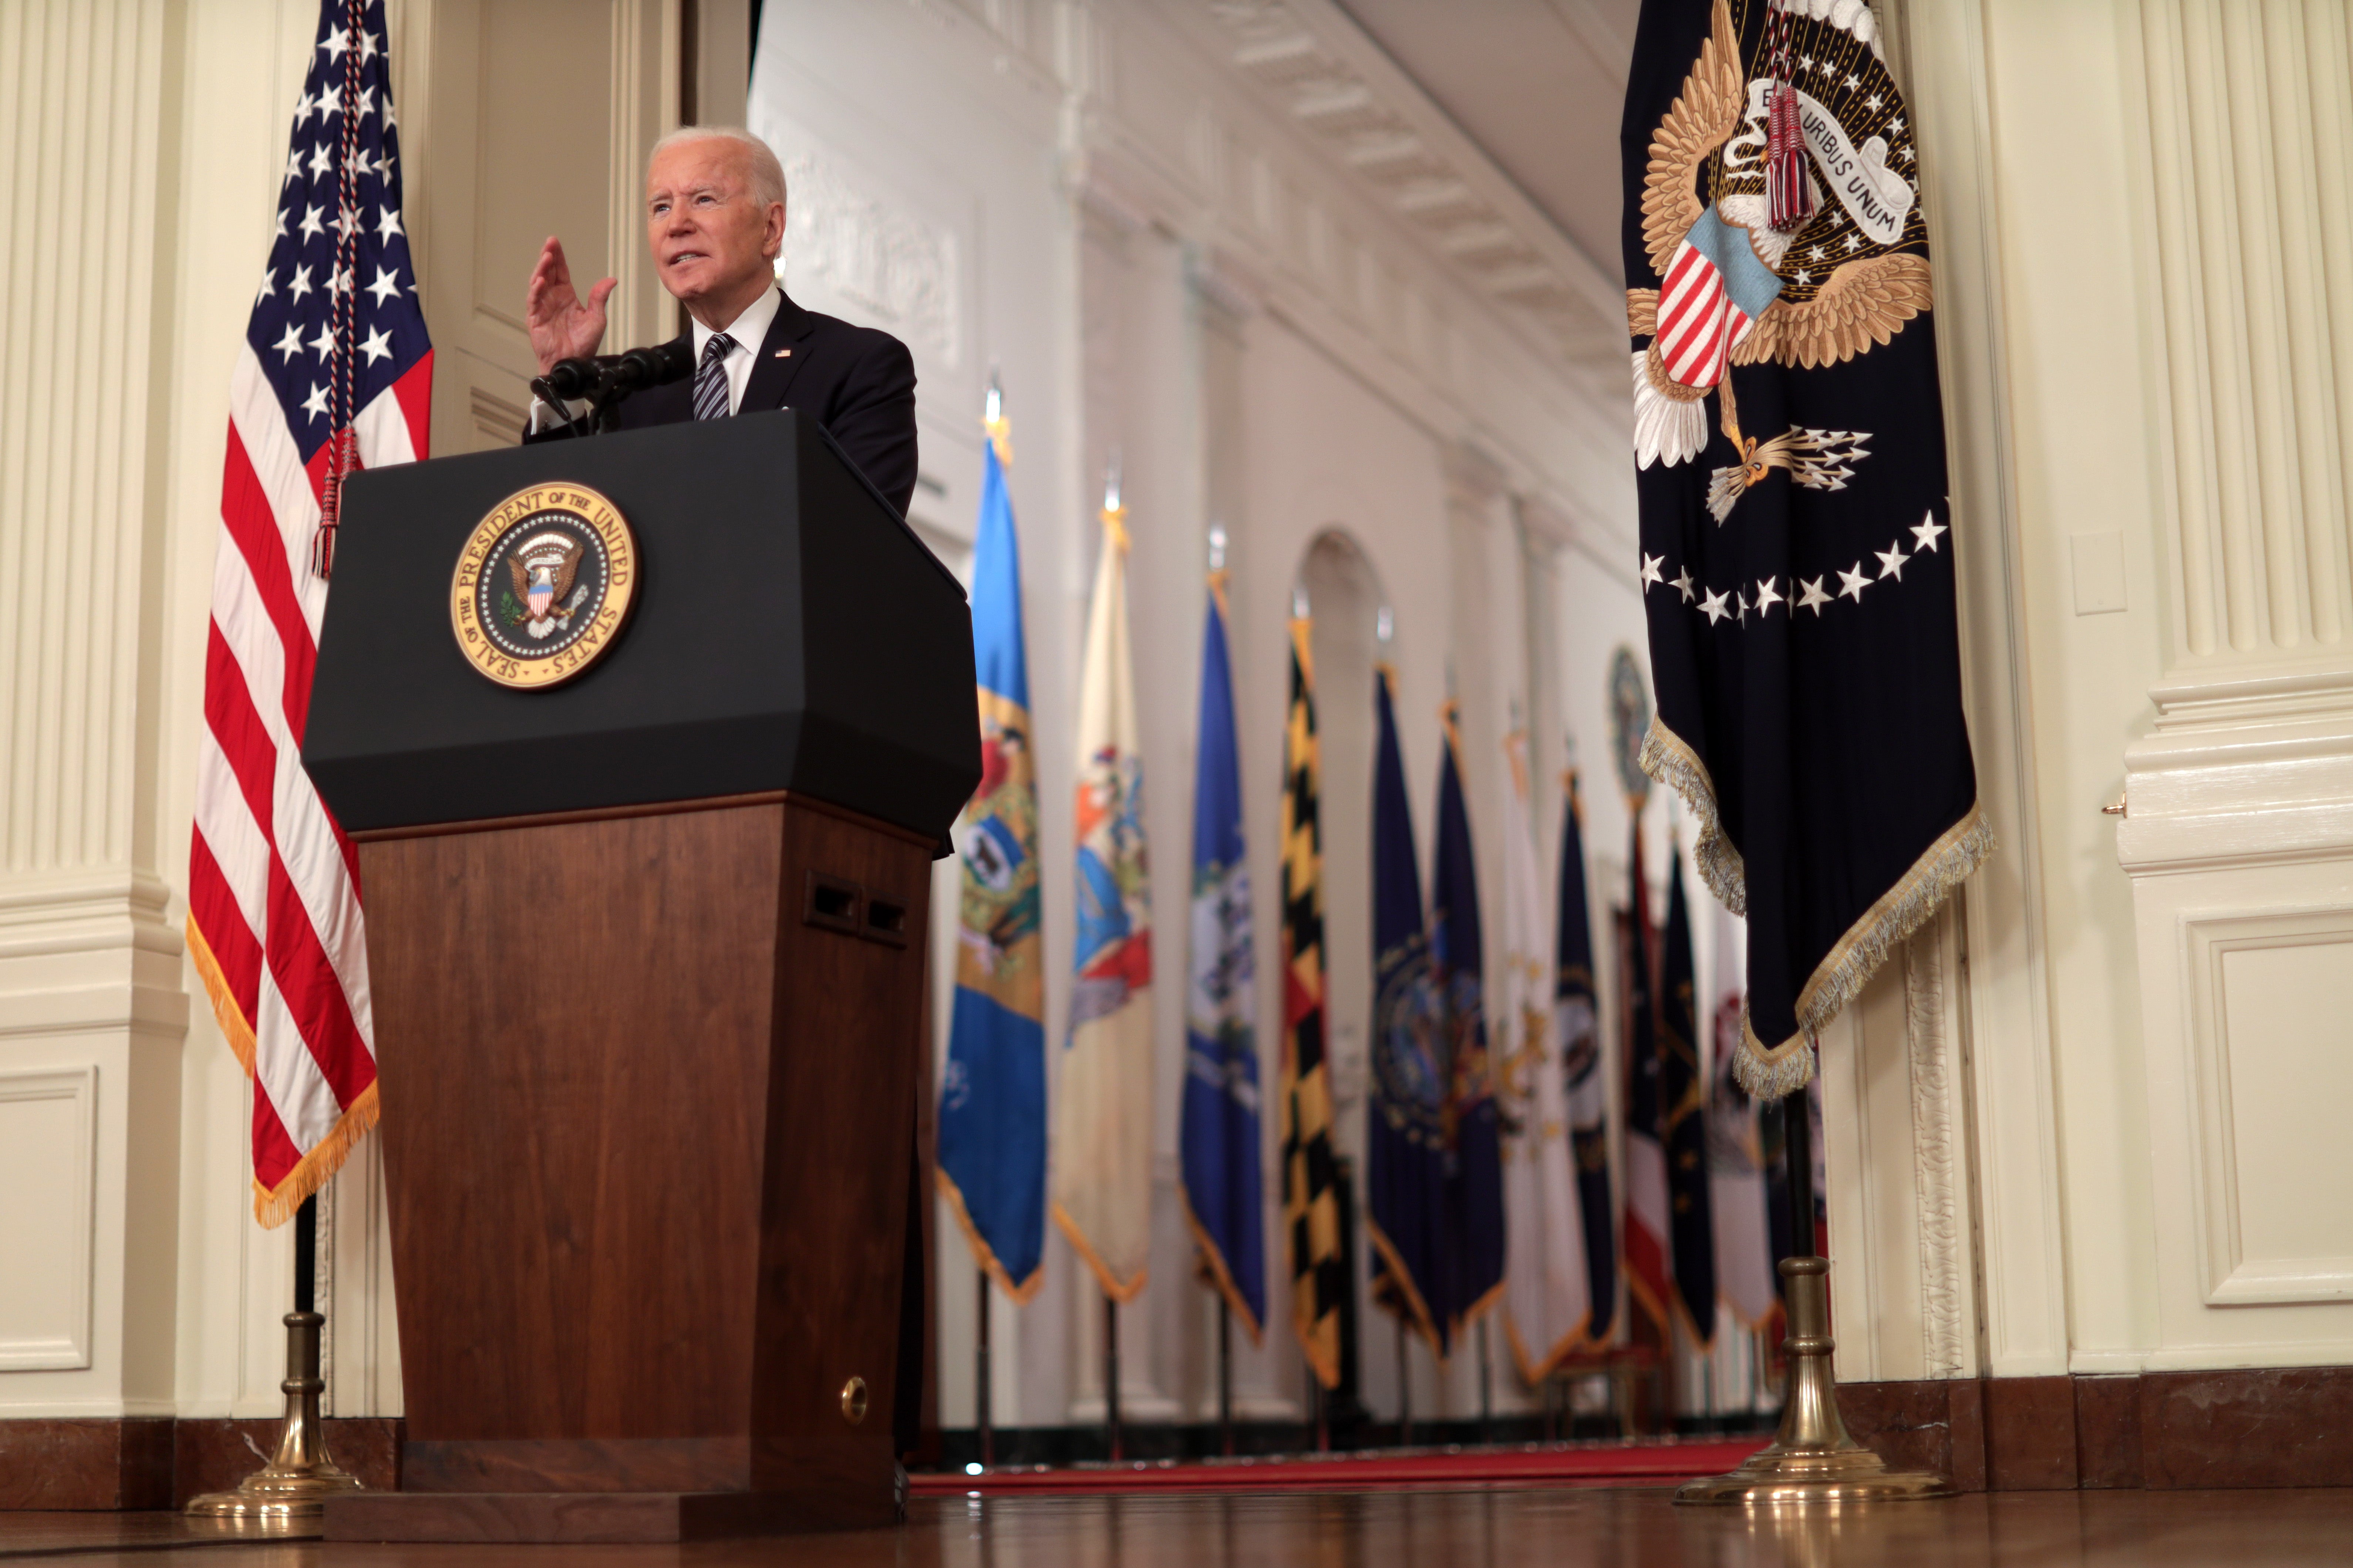 Joe Biden delivered his first primetime address as president on the one-year anniversary of the World Health Organisation announcing Covid as a global pandemic.